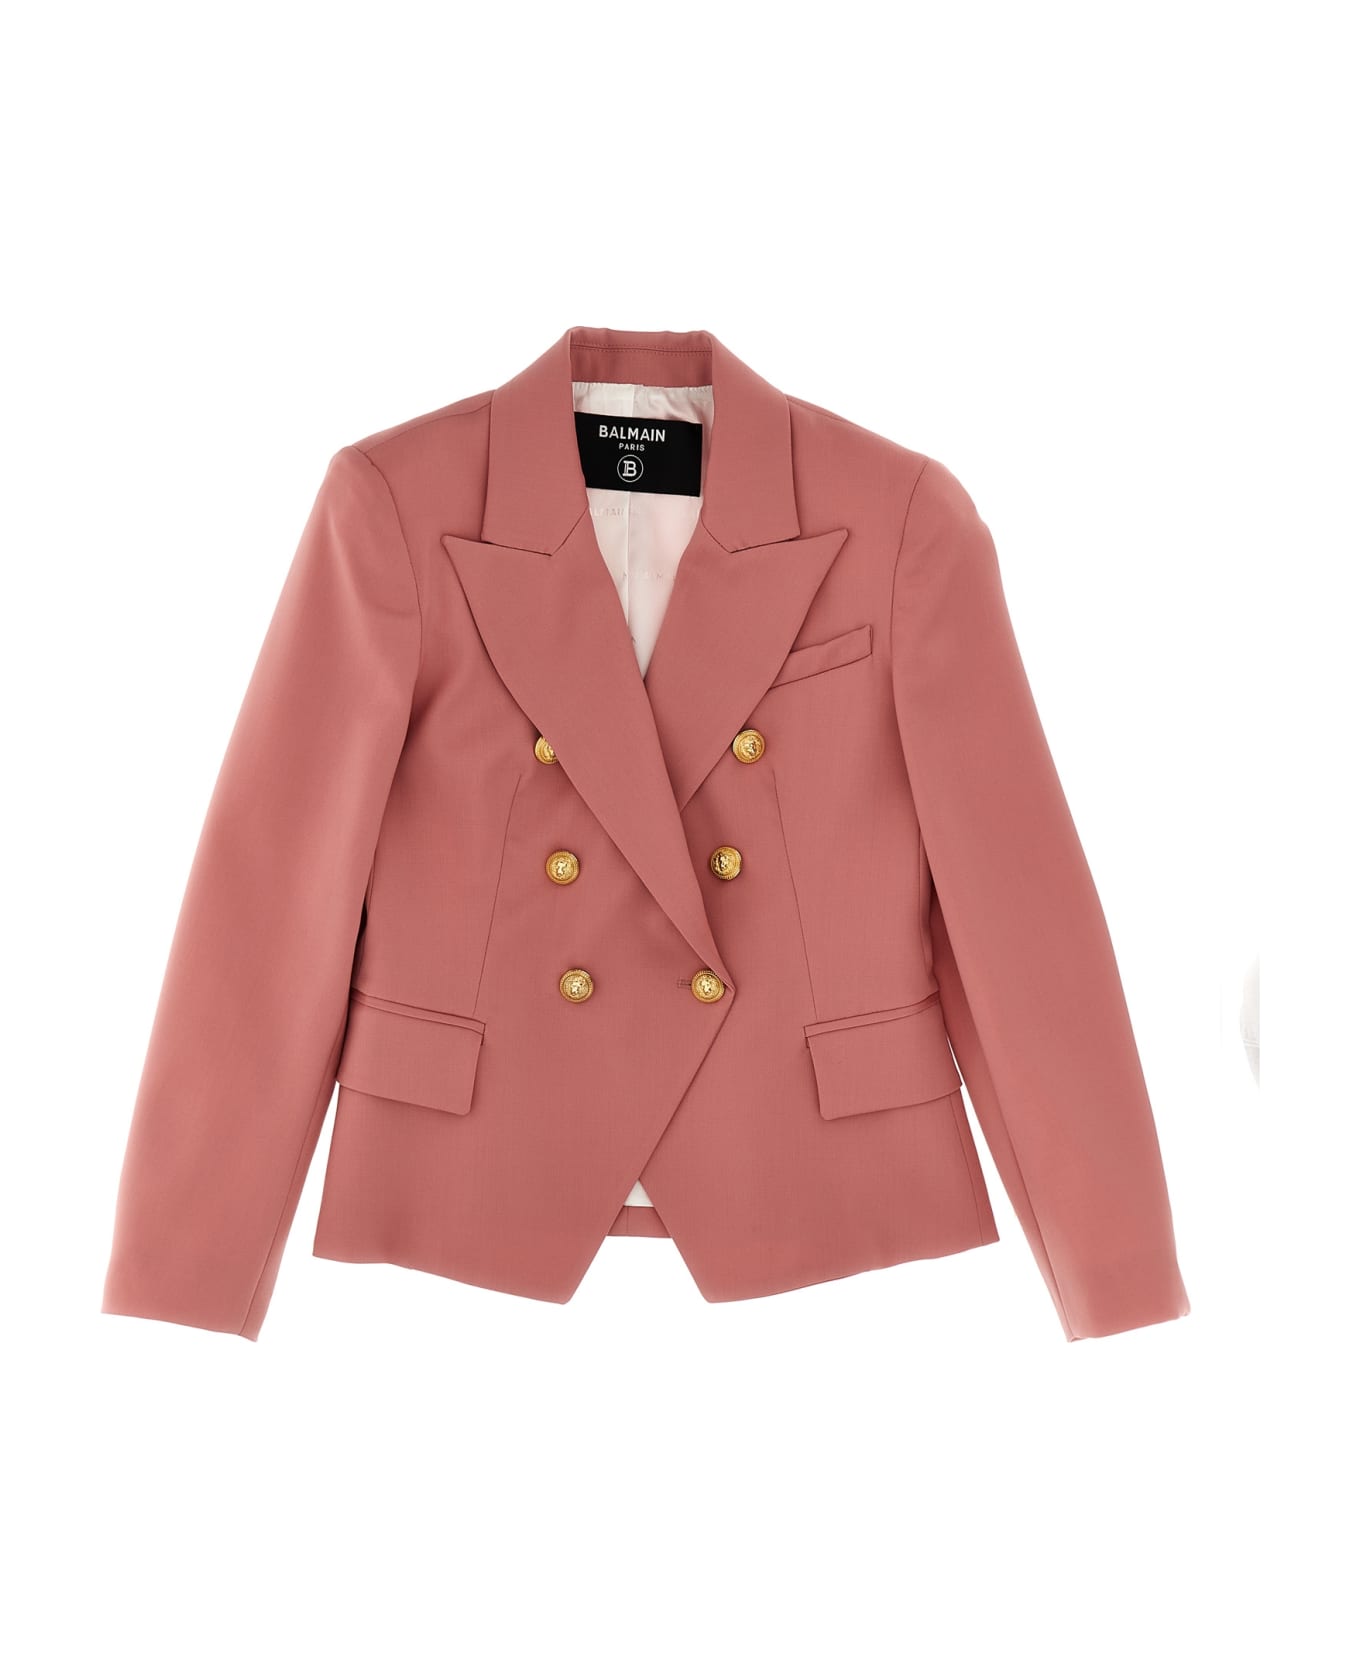 Balmain Double Breast Blazer Jacket With Logo Buttons - Pink